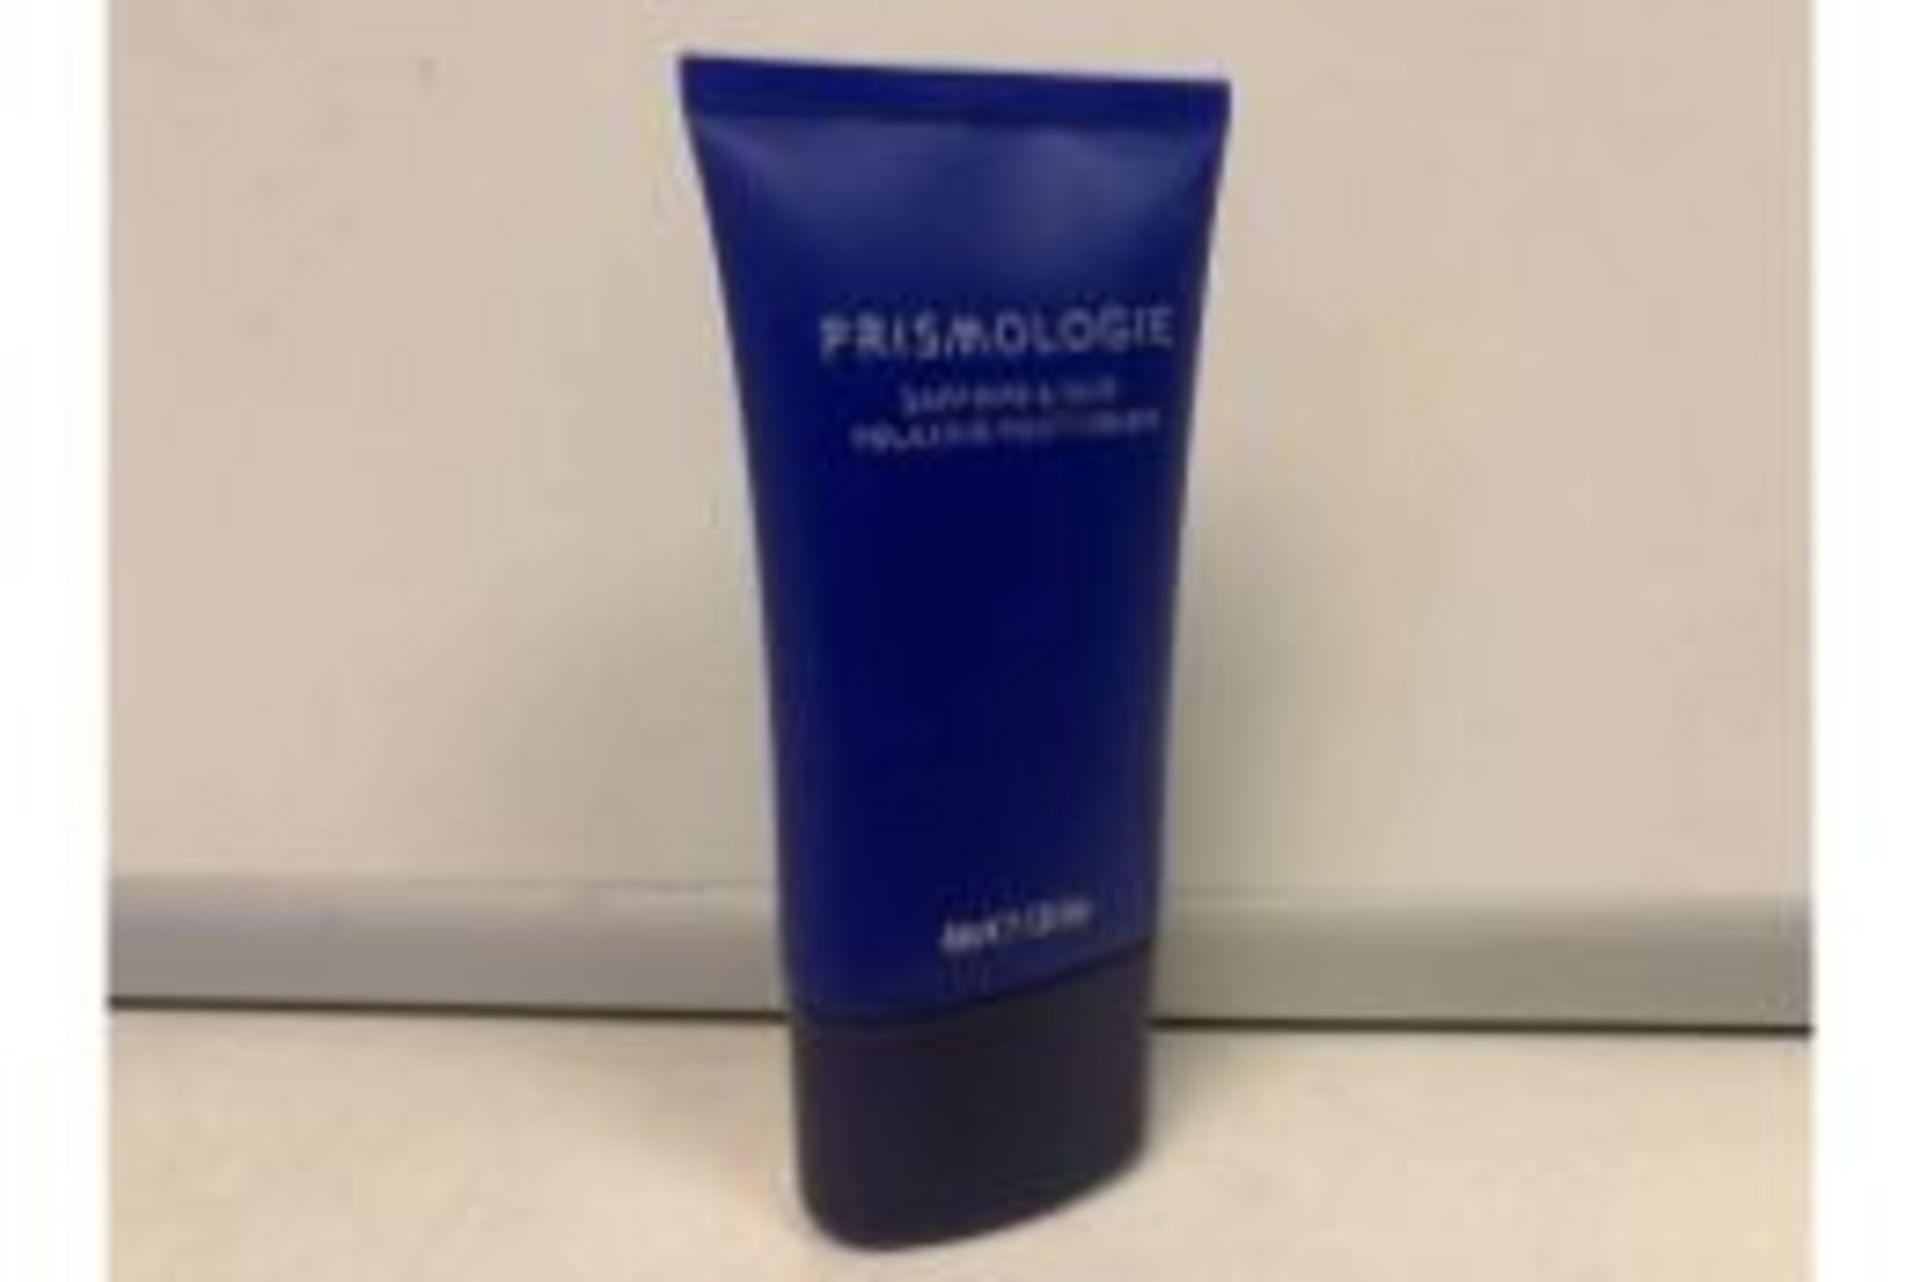 60 X BRAND NEW PRISMOLOGIE SAPHIRE AND OUD 40ML RELAXING FOOT CREAM RRP £14.95 EACH